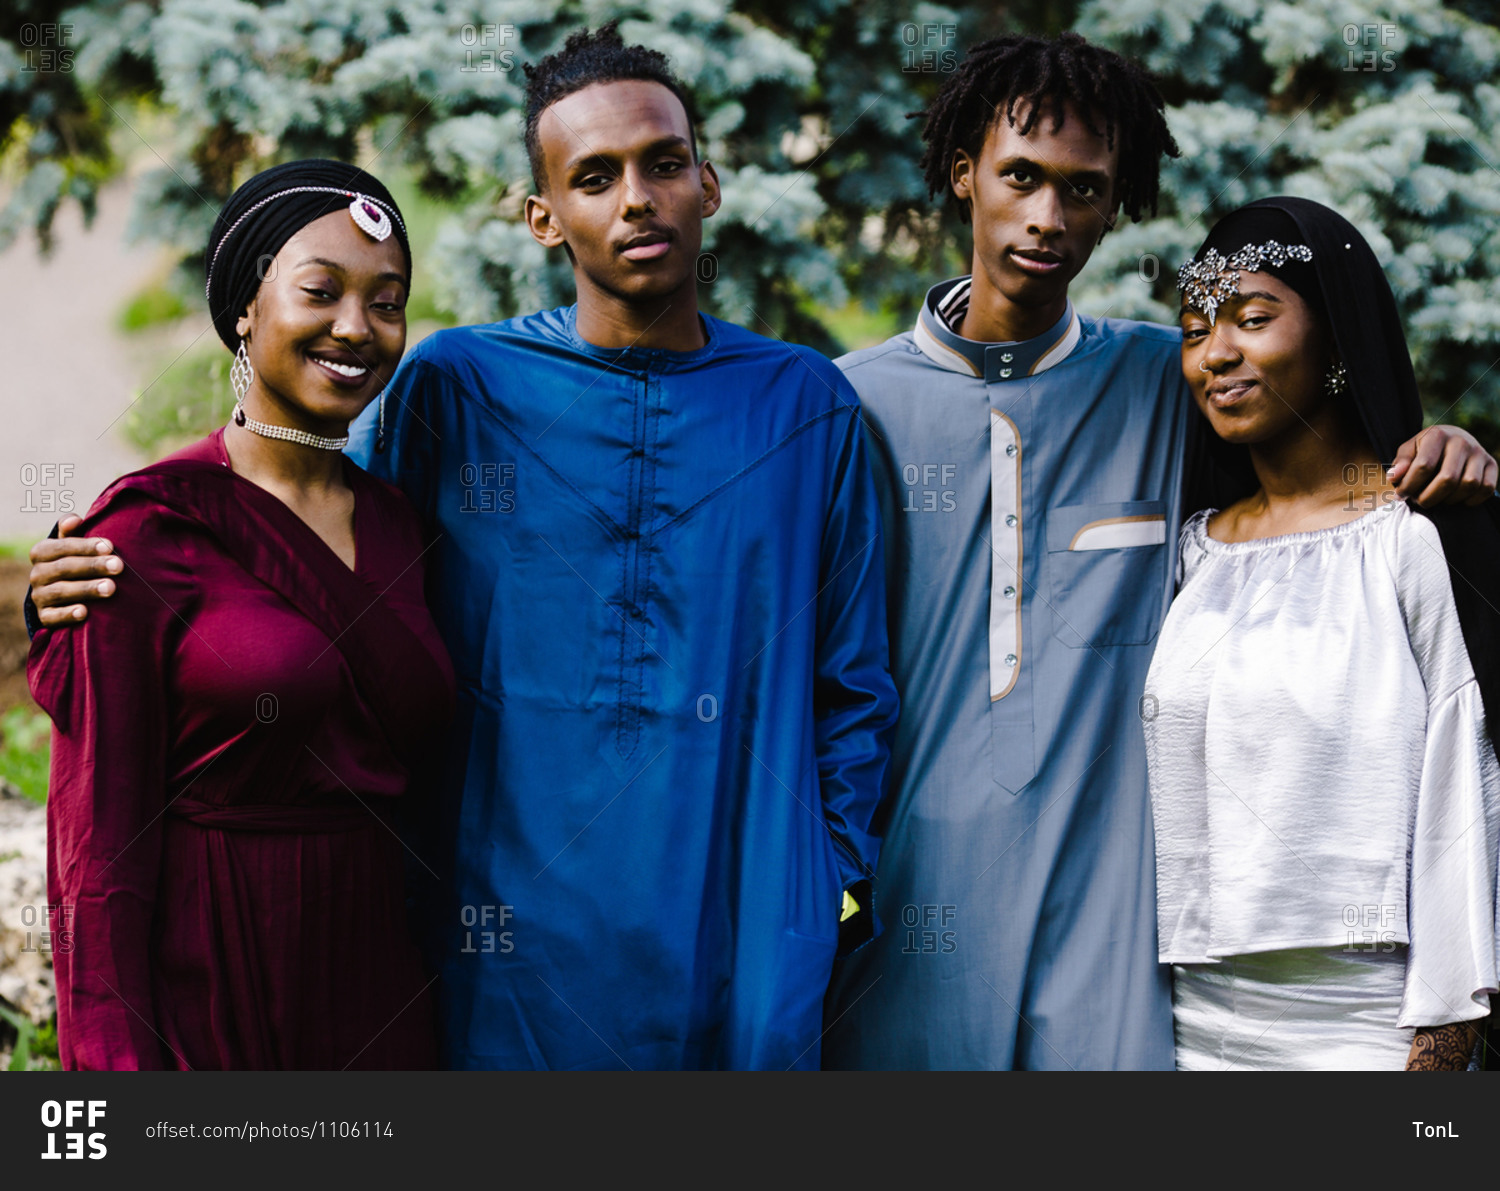 Two young black Muslim men standing with two black Muslim women in Islamic clothing